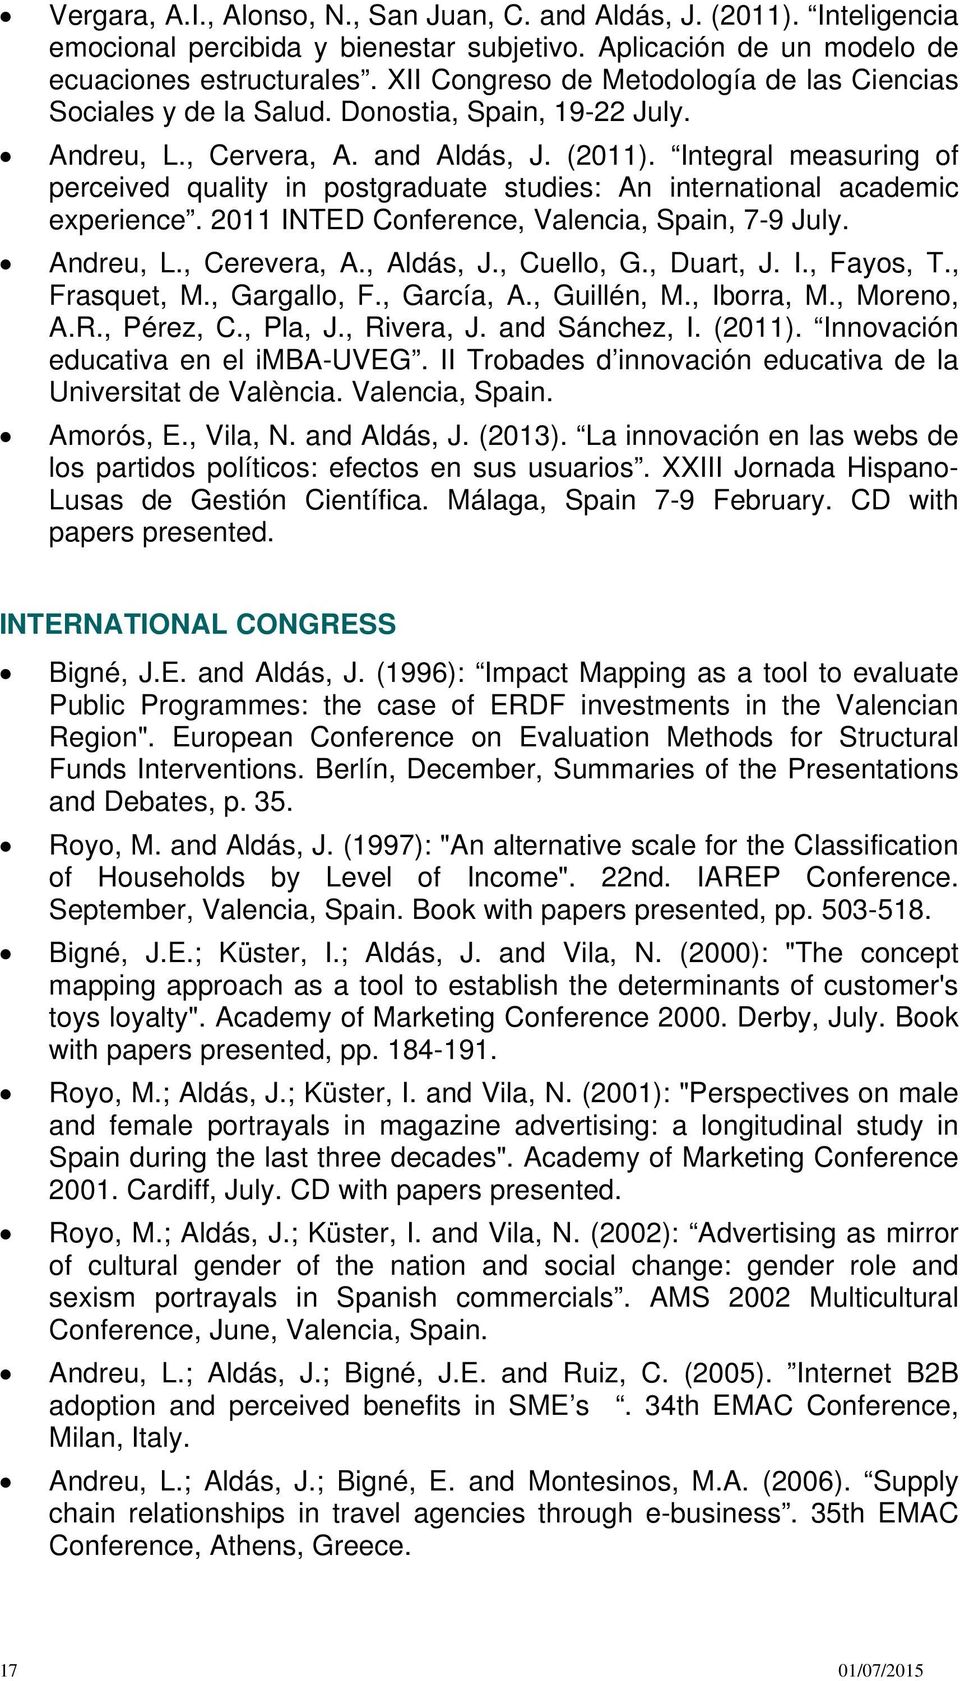 Integral measuring of perceived quality in postgraduate studies: An international academic experience. 2011 INTED Conference, Valencia, Spain, 7-9 July. Andreu, L., Cerevera, A., Aldás, J., Cuello, G.